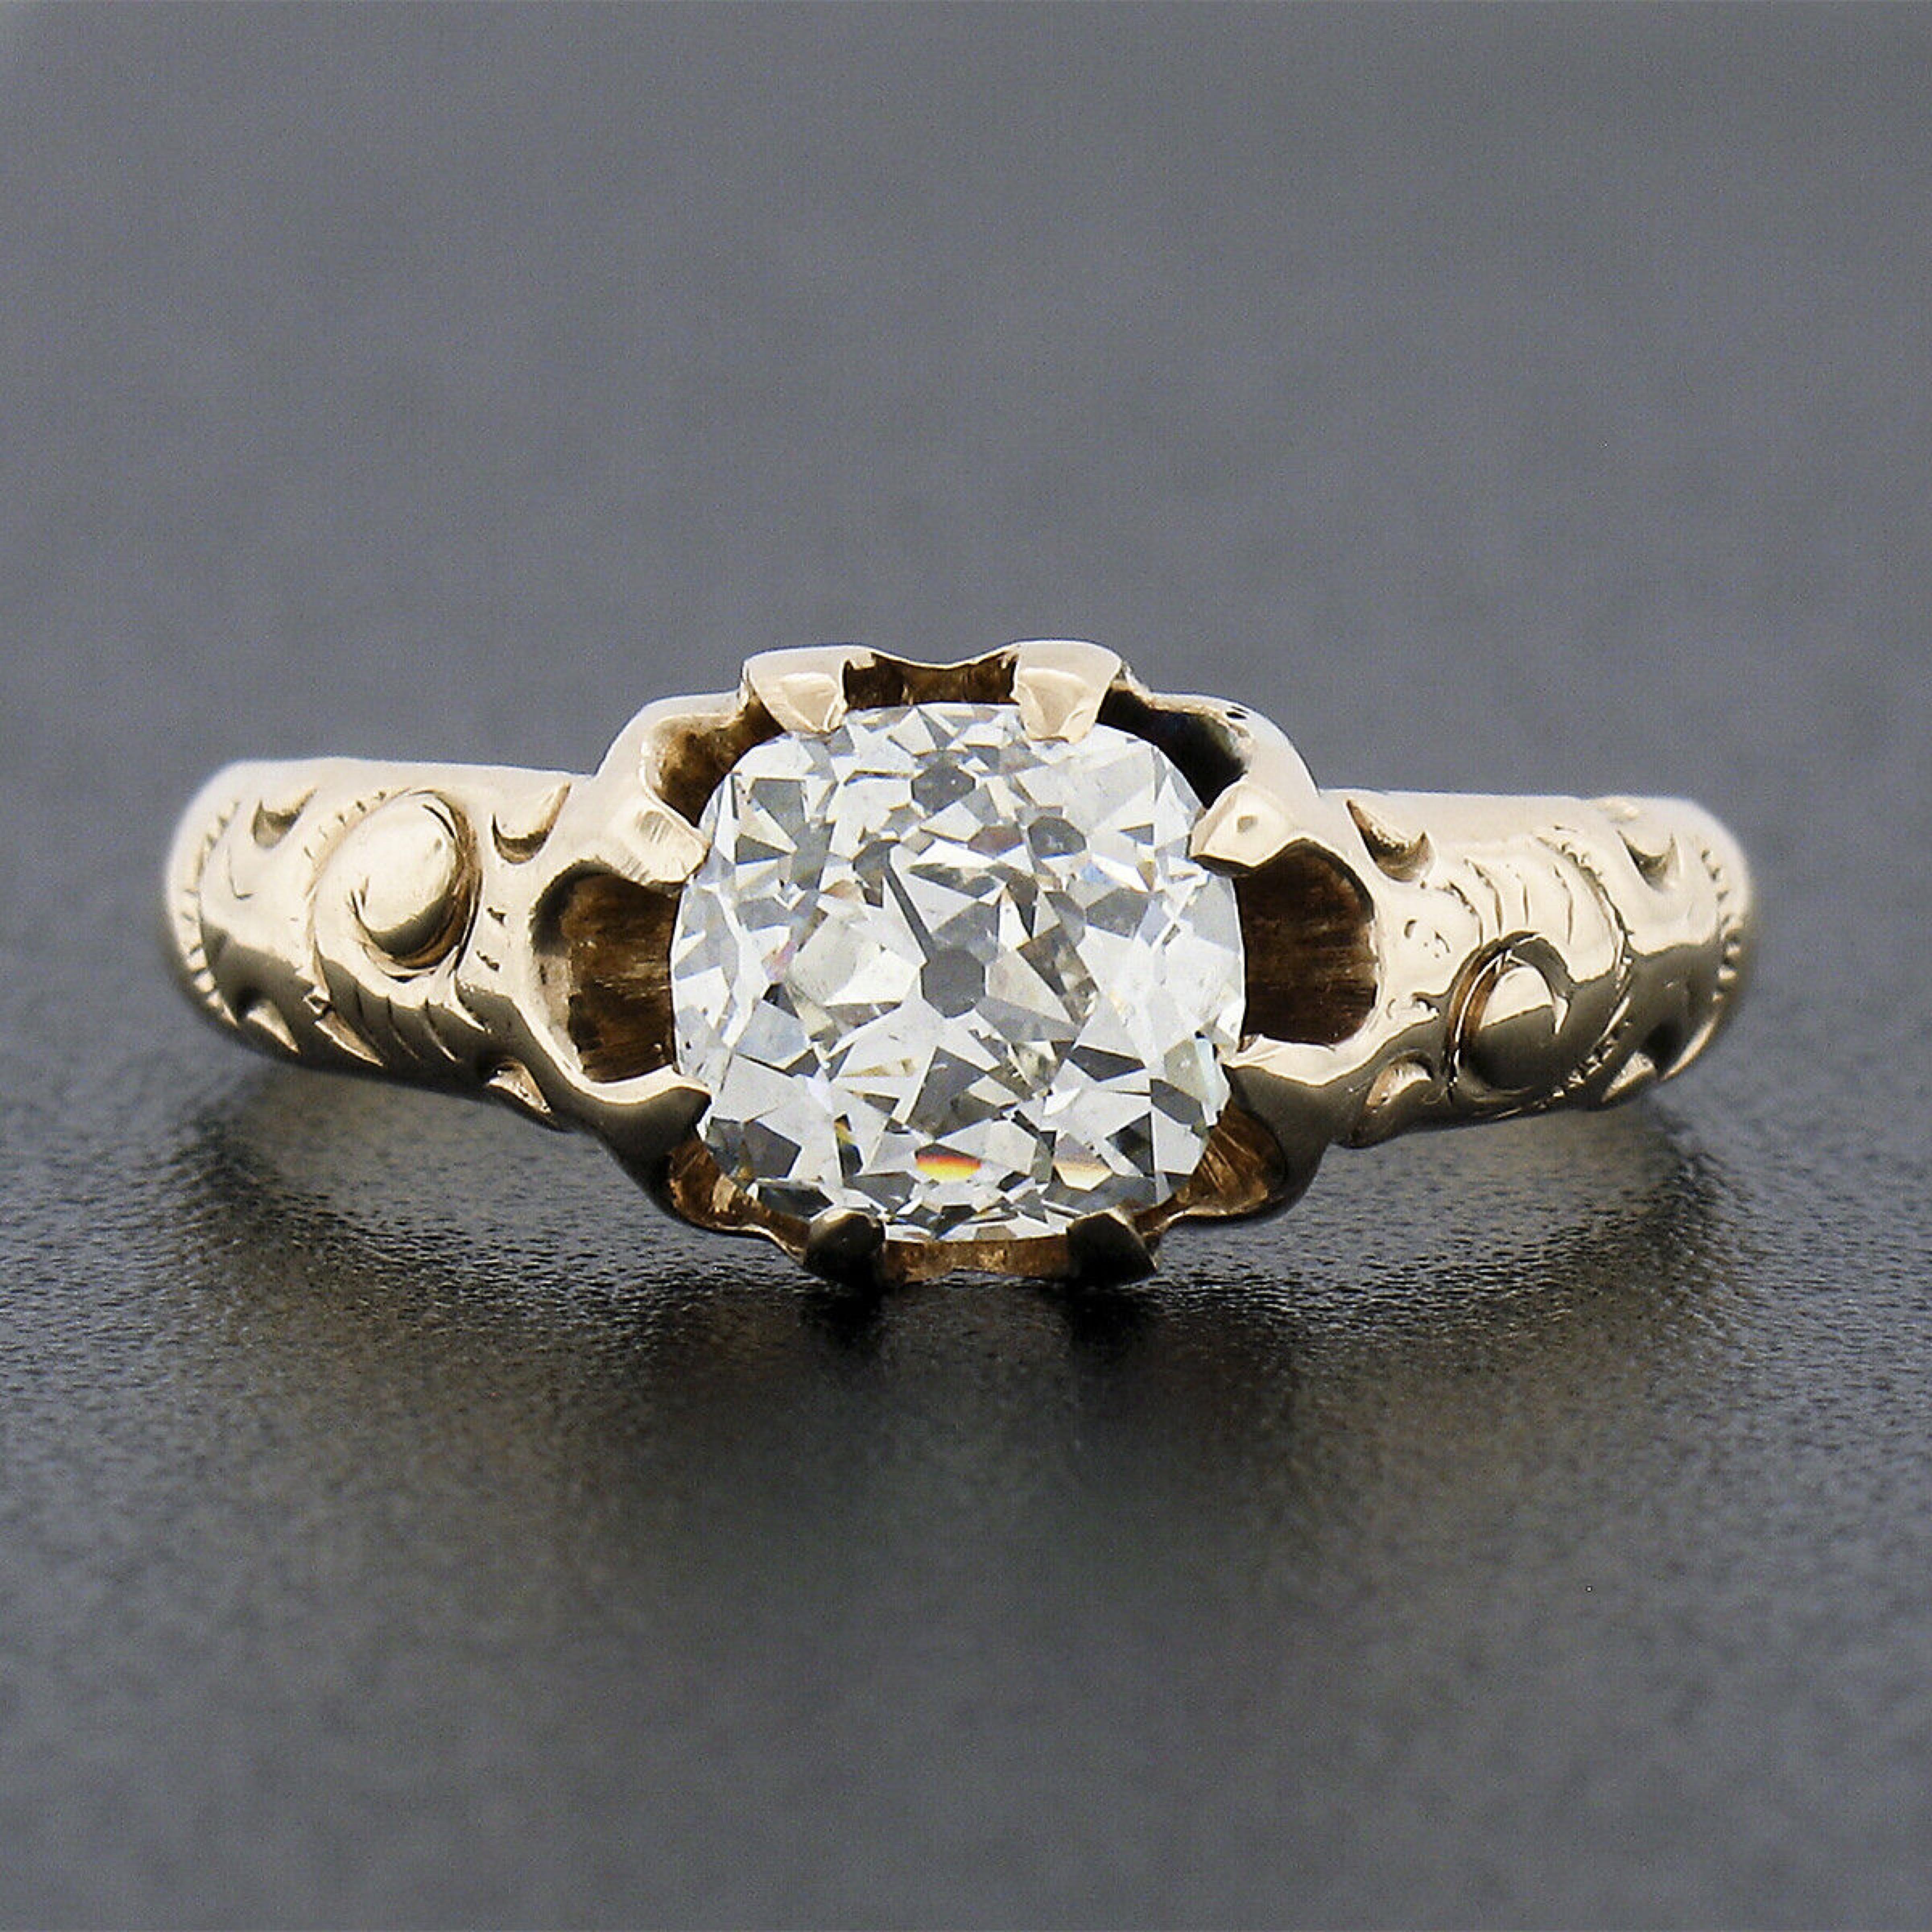 This stunning antique ring was crafted from solid 14k yellow gold during the Victorian era and features a truly breathtaking old mine cushion cut diamond solitaire at its center. This fine quality diamond is GIA certified at exactly 1.20 carats and